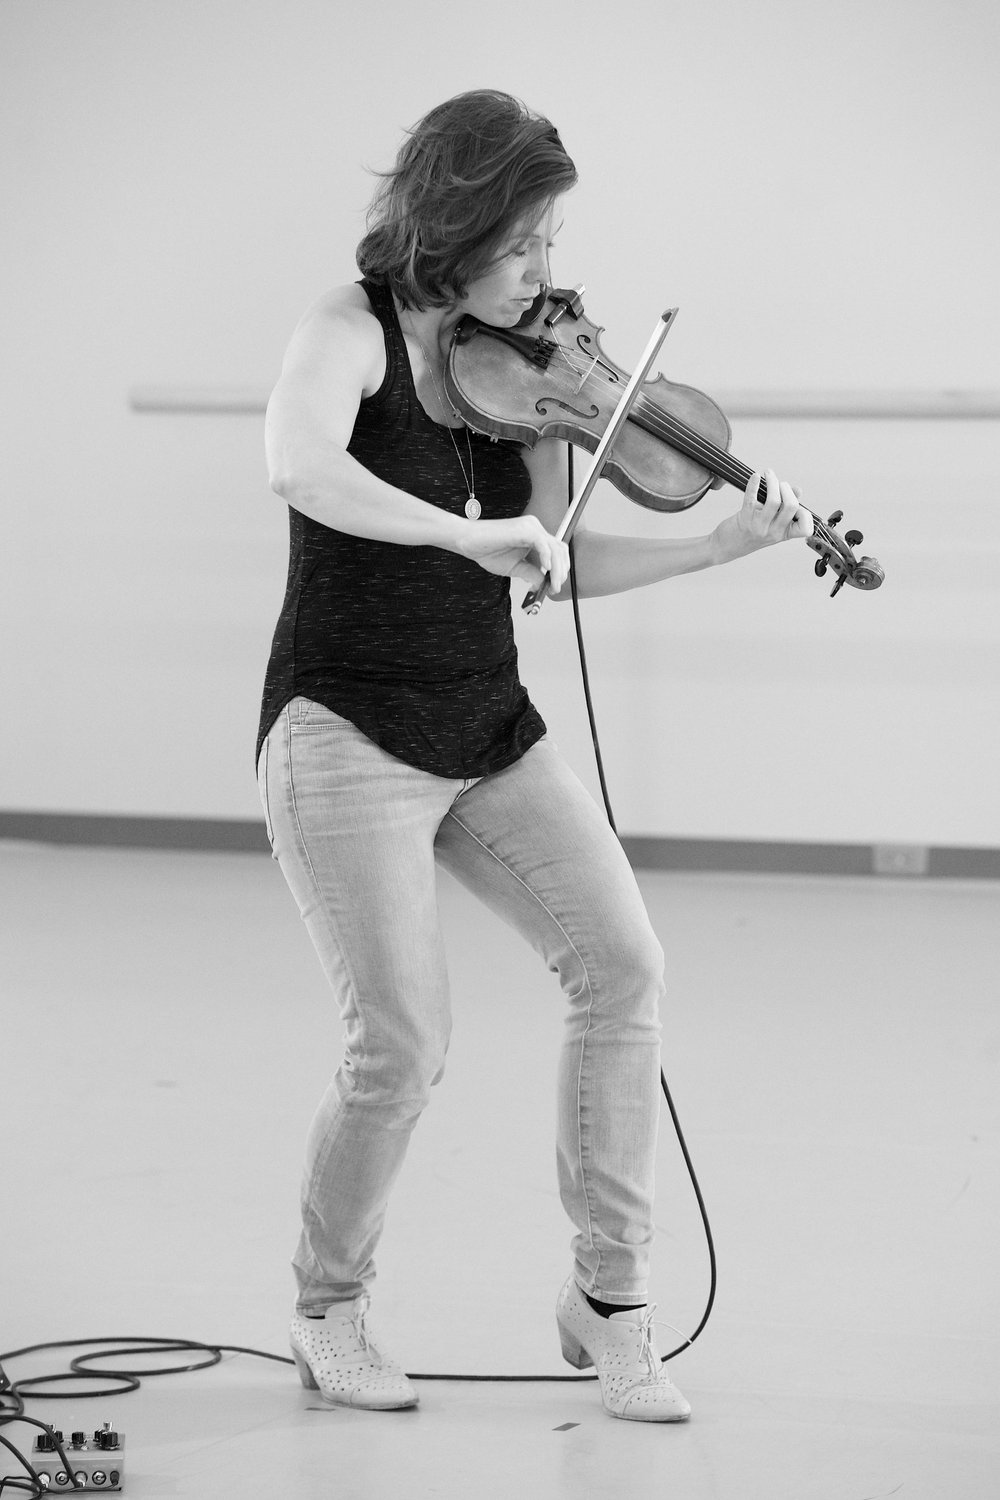  Sarah playing her violin in rehearsal. Her knees are bent, and she is leaning slightly forward.  